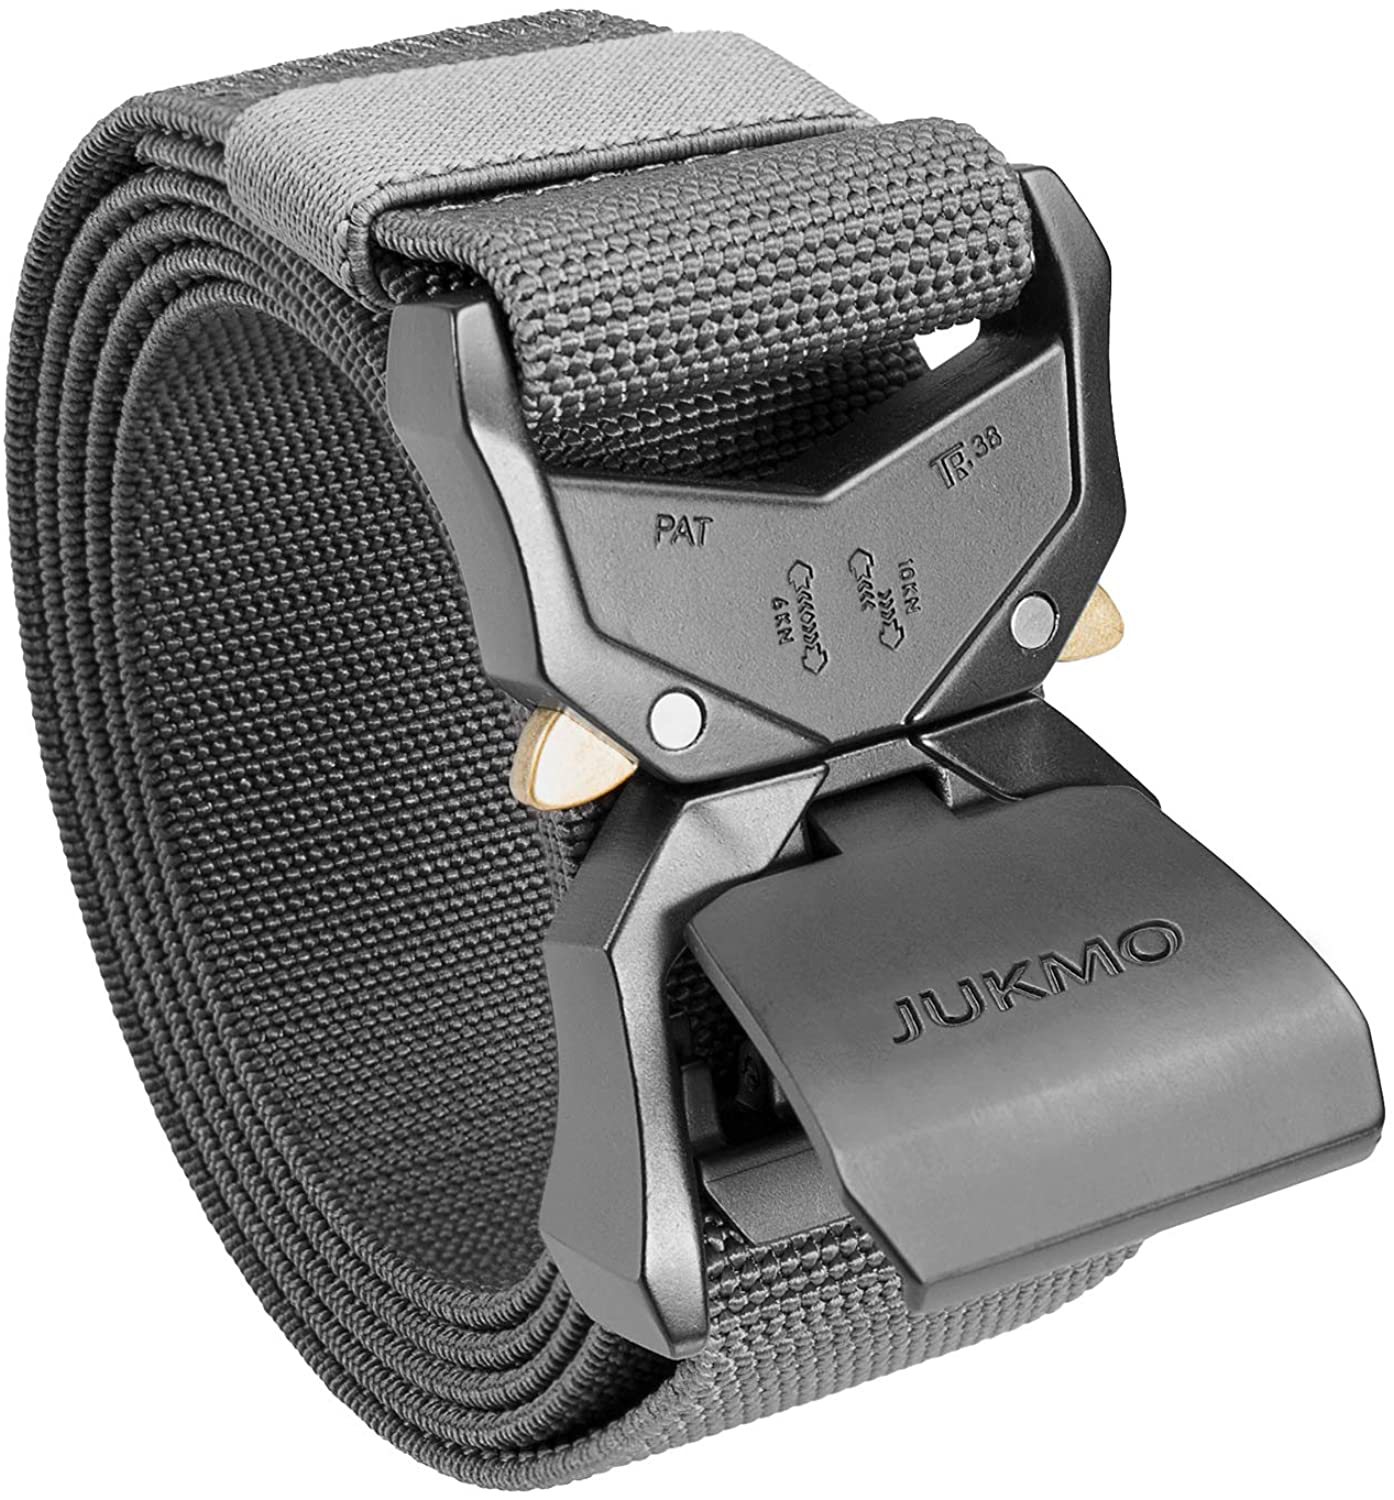 JUKMO Tactical Belt, Military Hiking Rigger 1.5" Nylon Web Work Belt with Heavy Duty Quick Release Buckle